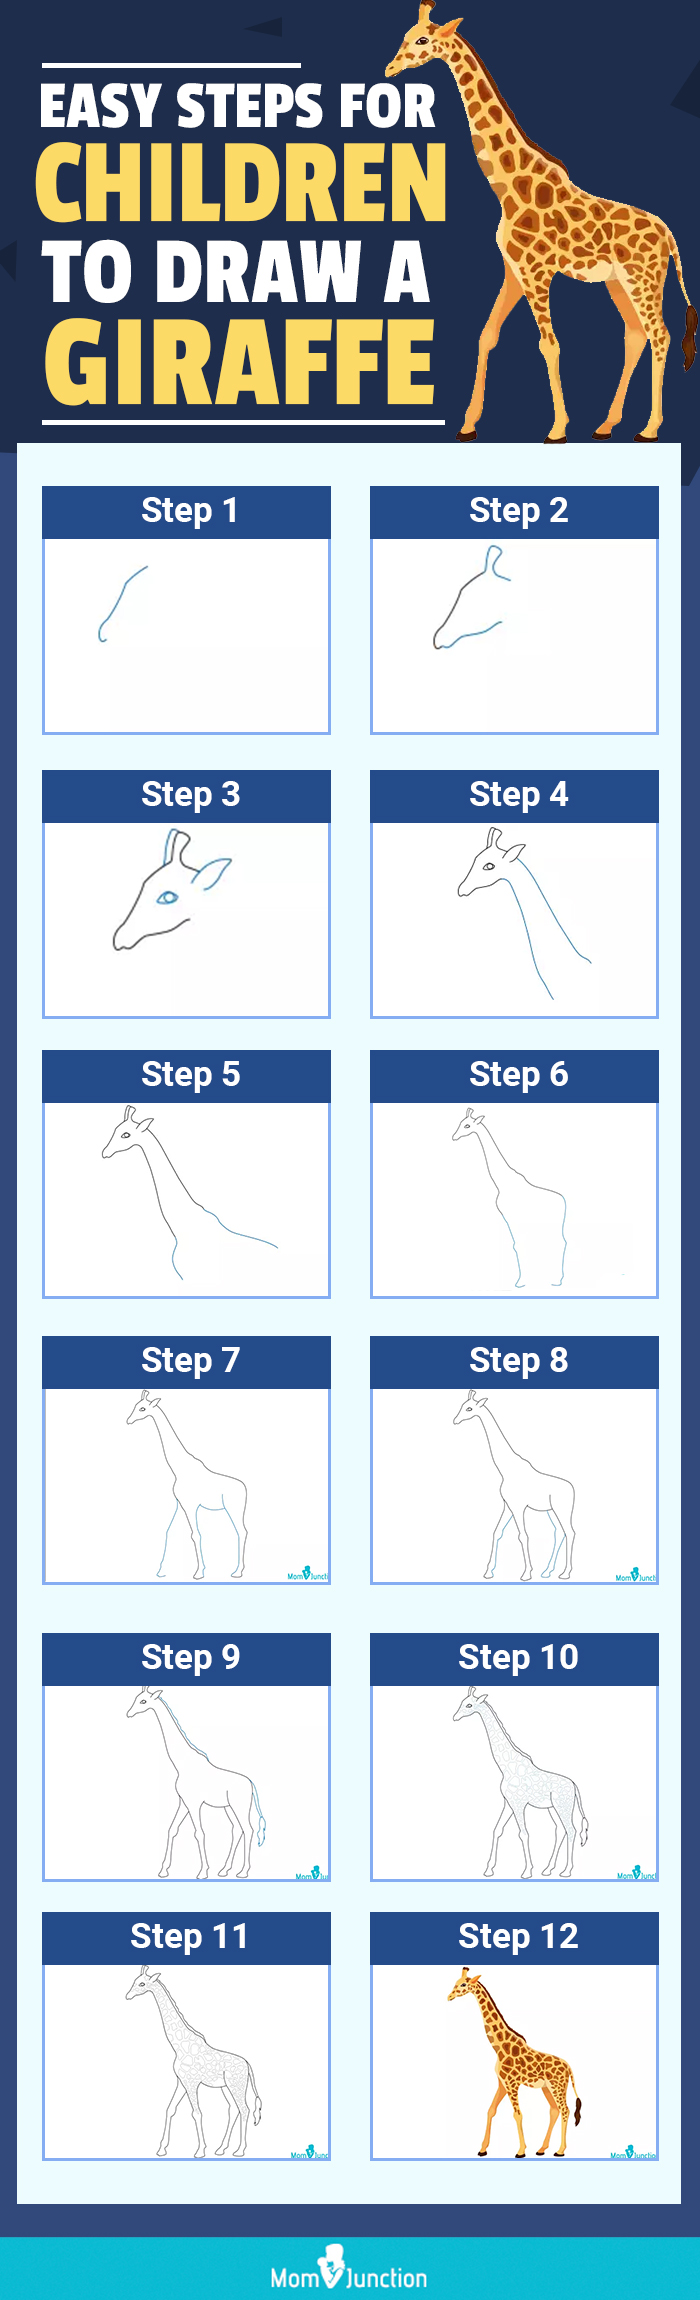 easy steps for children to draw a giraffe (infographic)